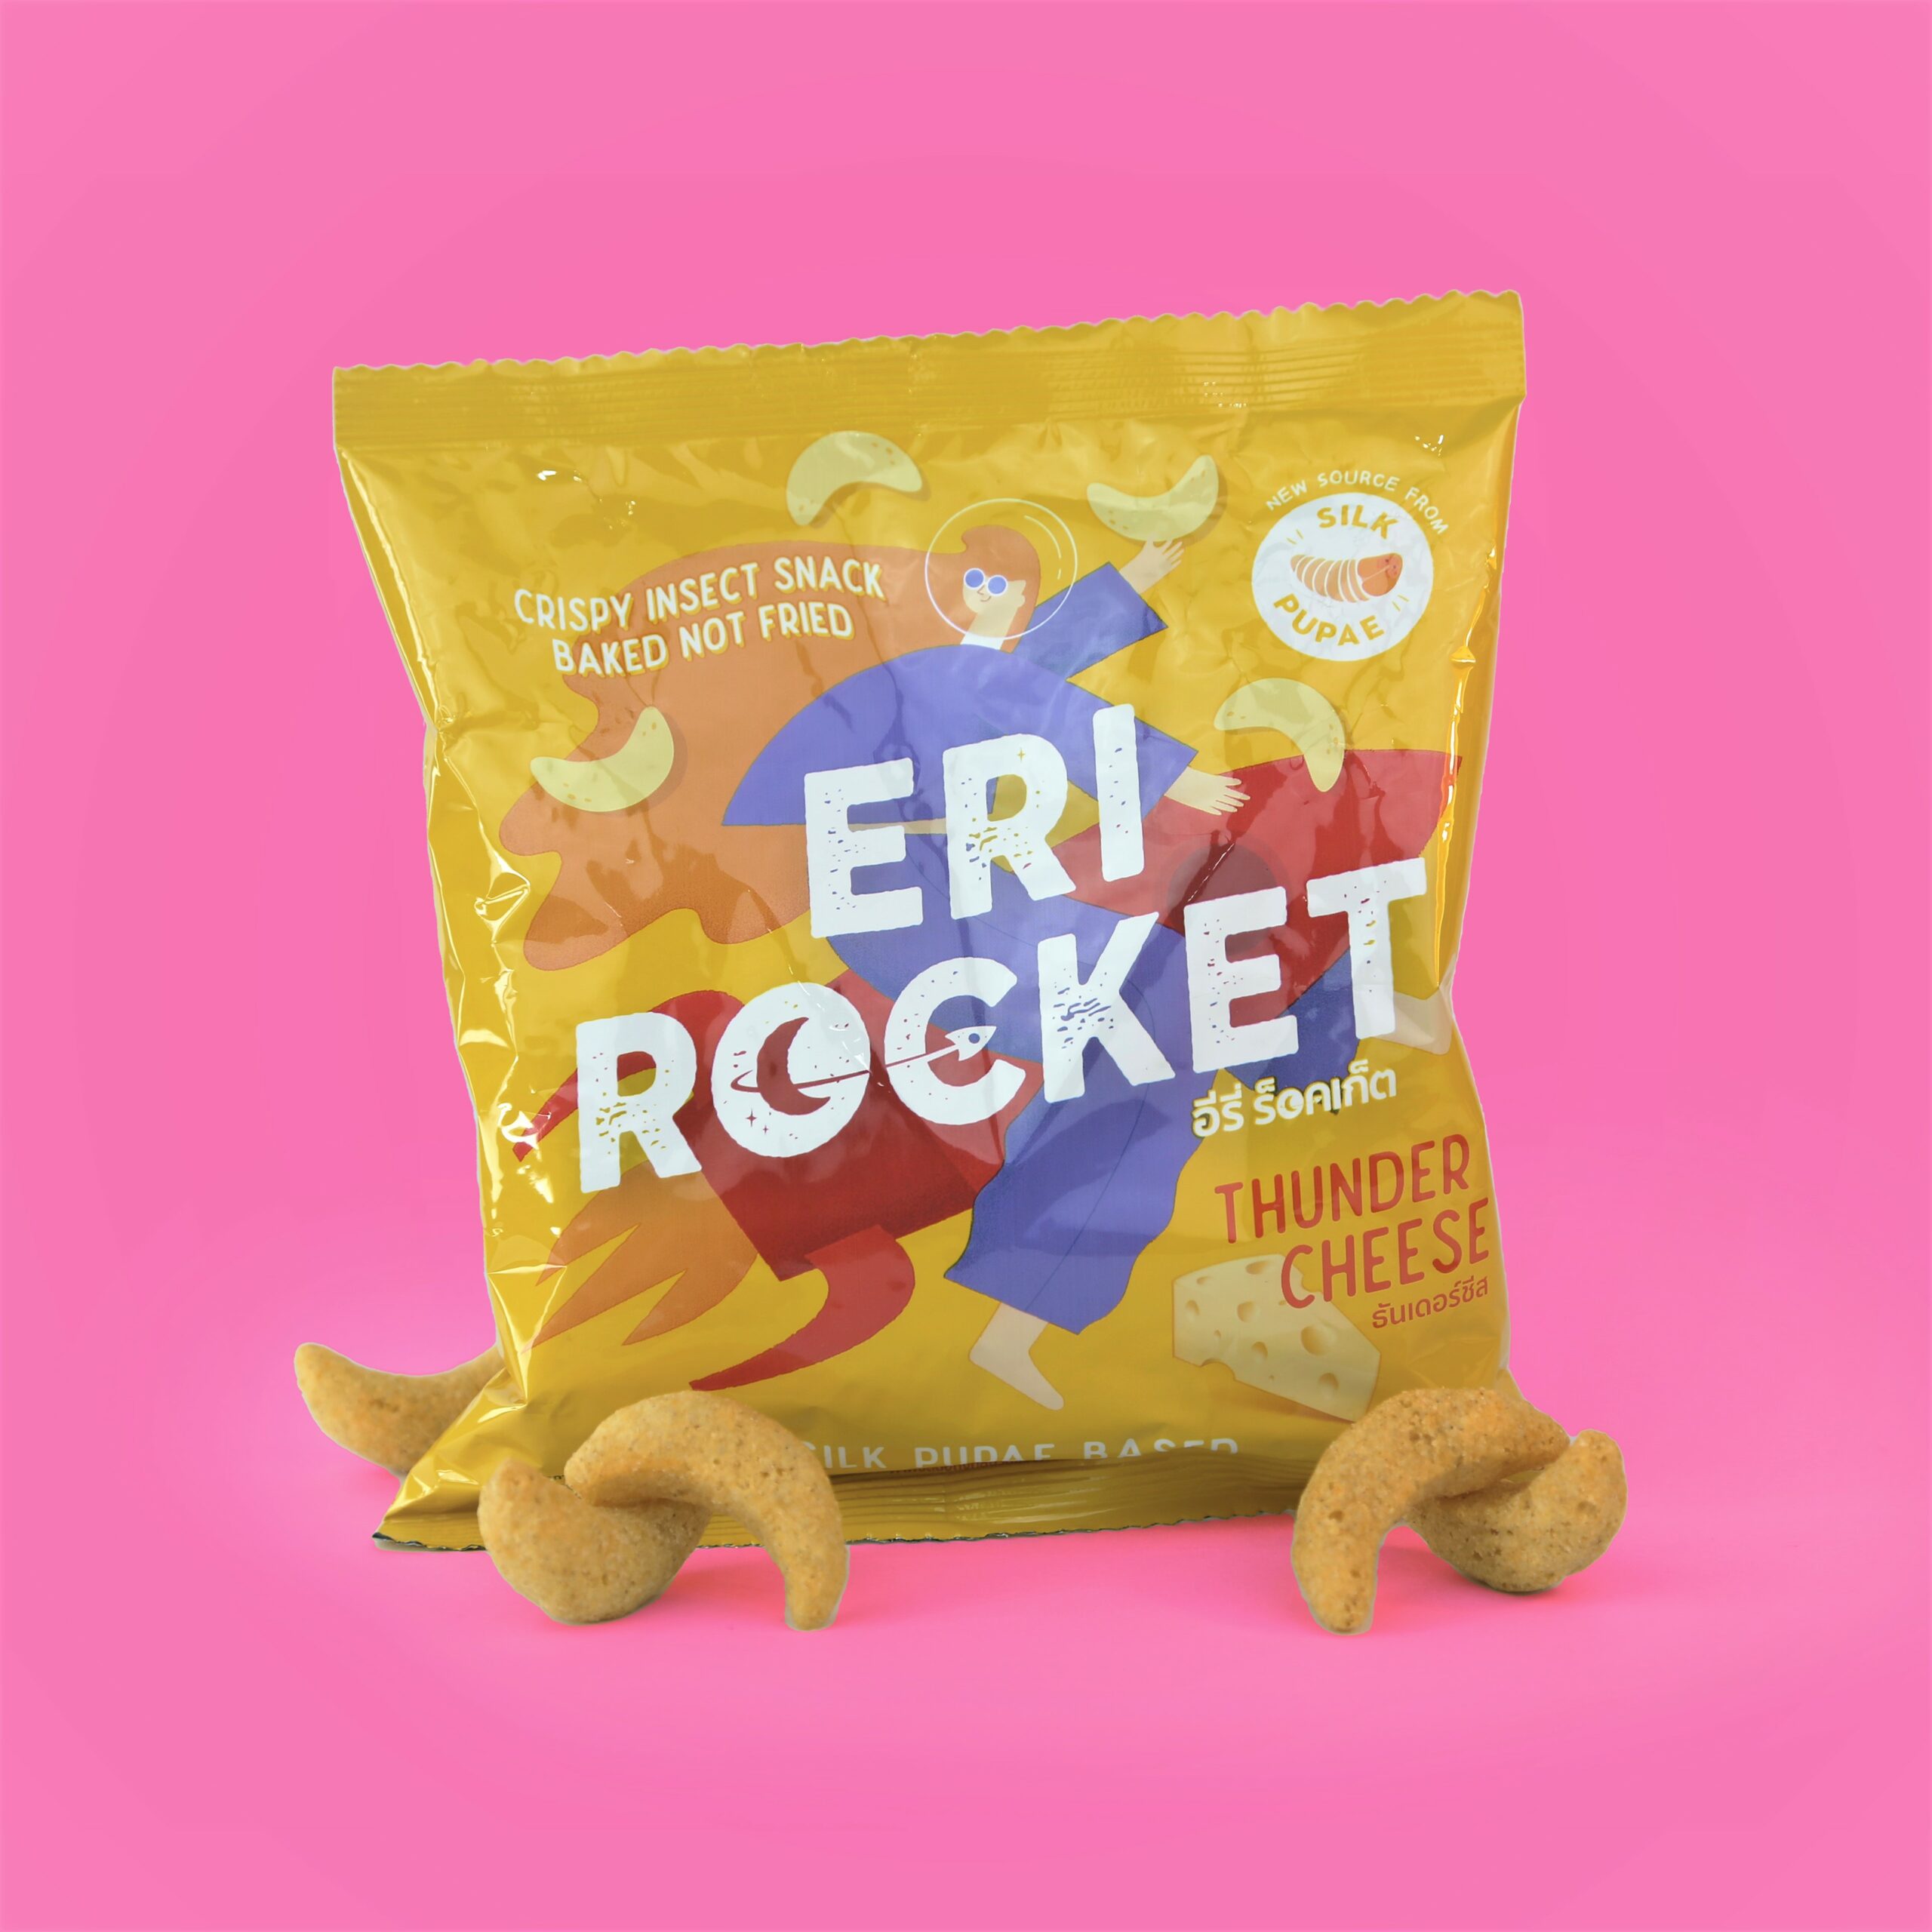 Eri Rocket silk pupae snack cheese flavor. Thai local brand of innovative and sustainable future snack